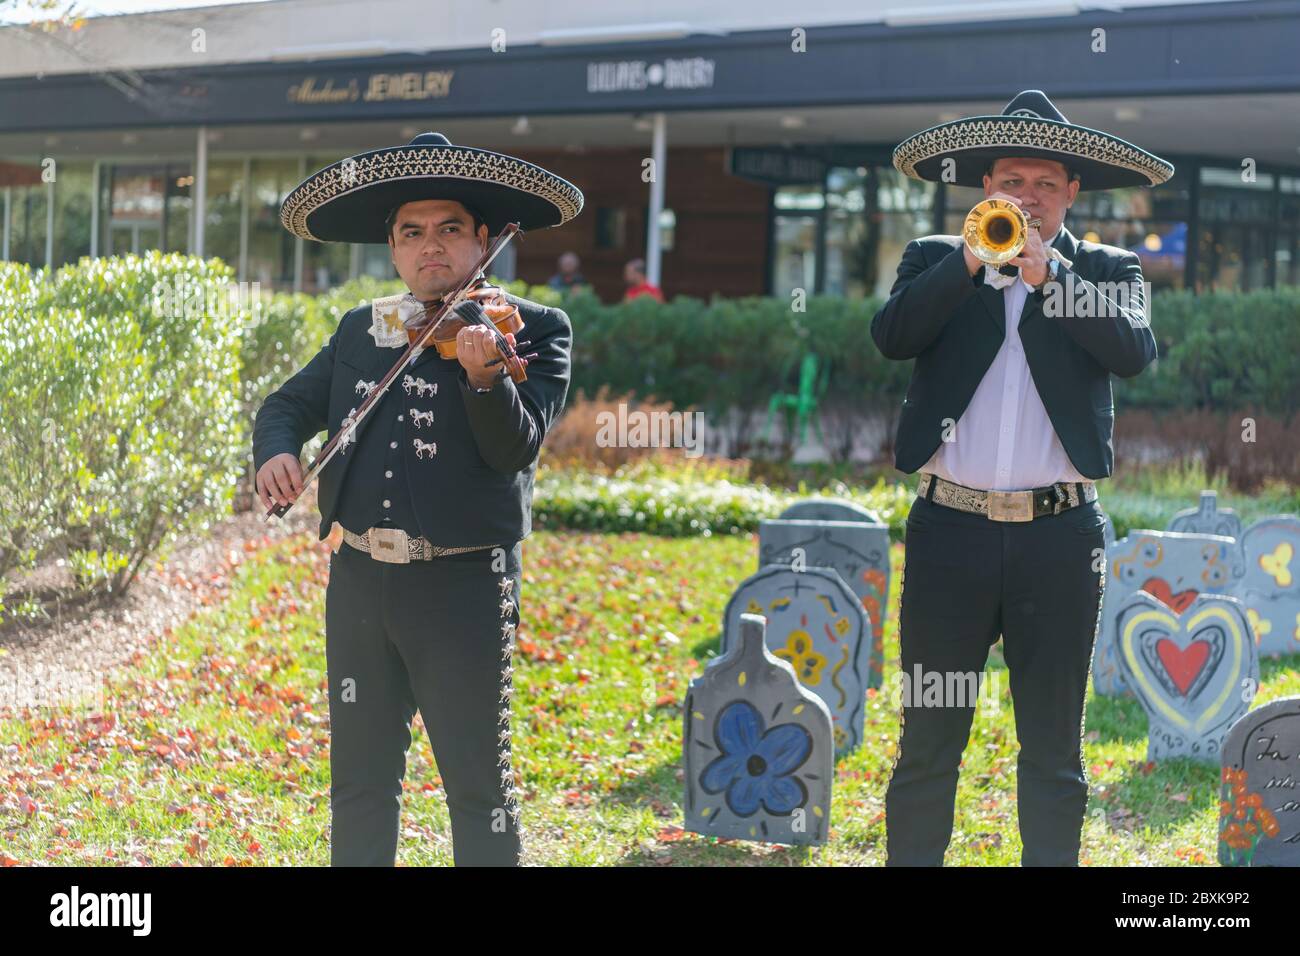 Day of the Dead Celebration and Mexican Heritage Stock Photo